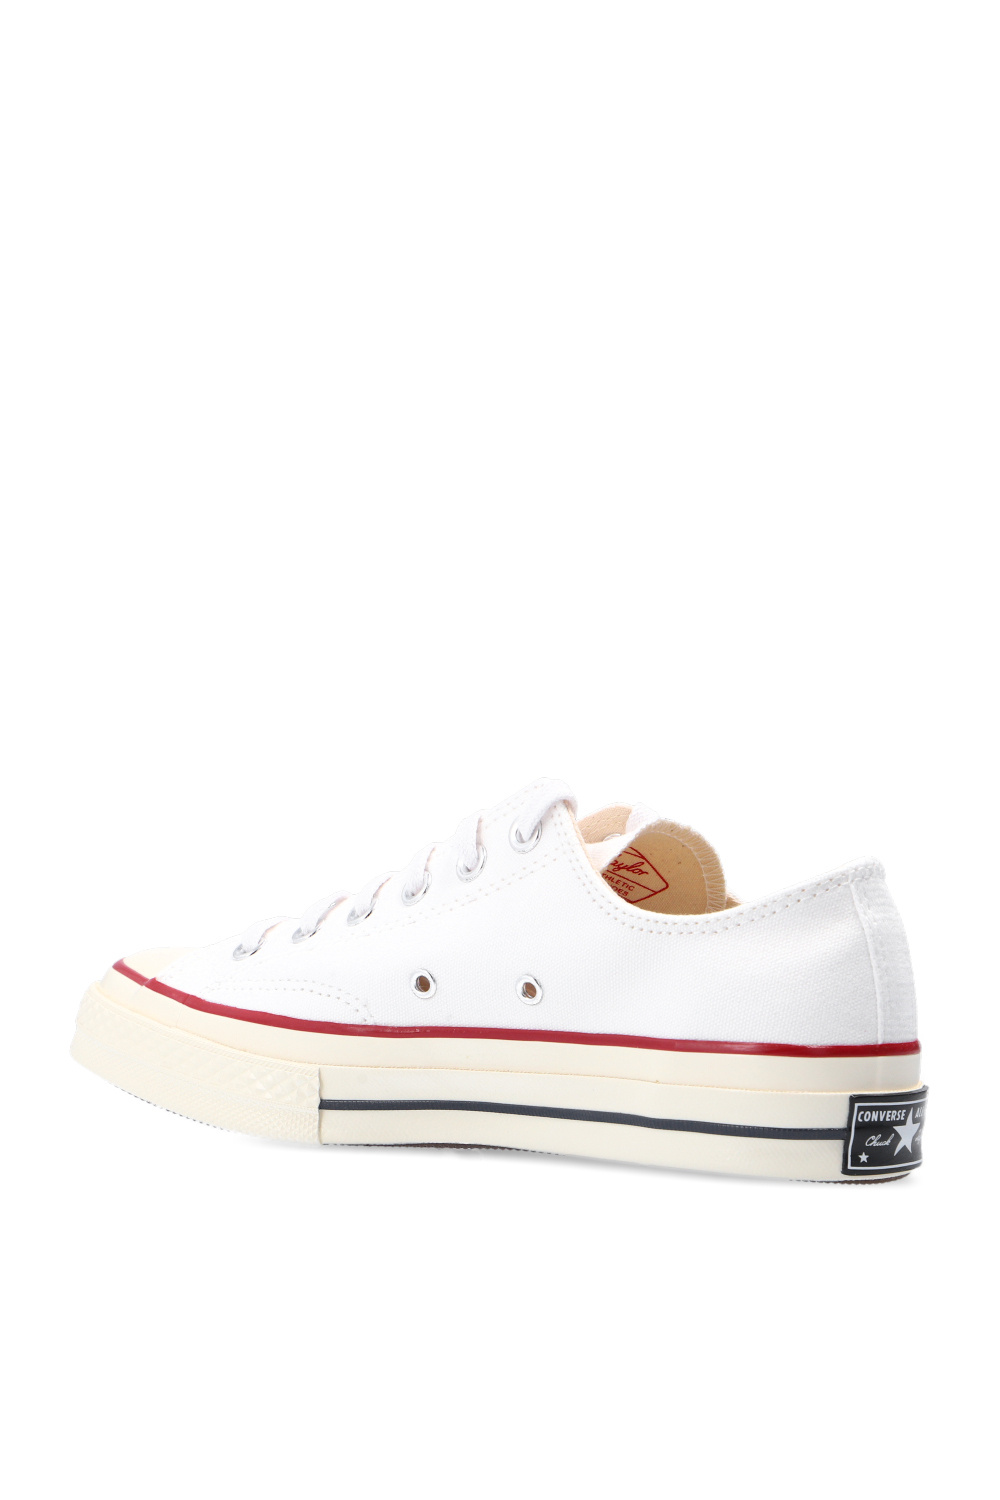 SchaferandweinerShops Spain - The Fear of God Essentials x Converse Chuck  Taylor collab is set to drop exclusively at - White 'Chuck 70 OX' sneakers  Converse